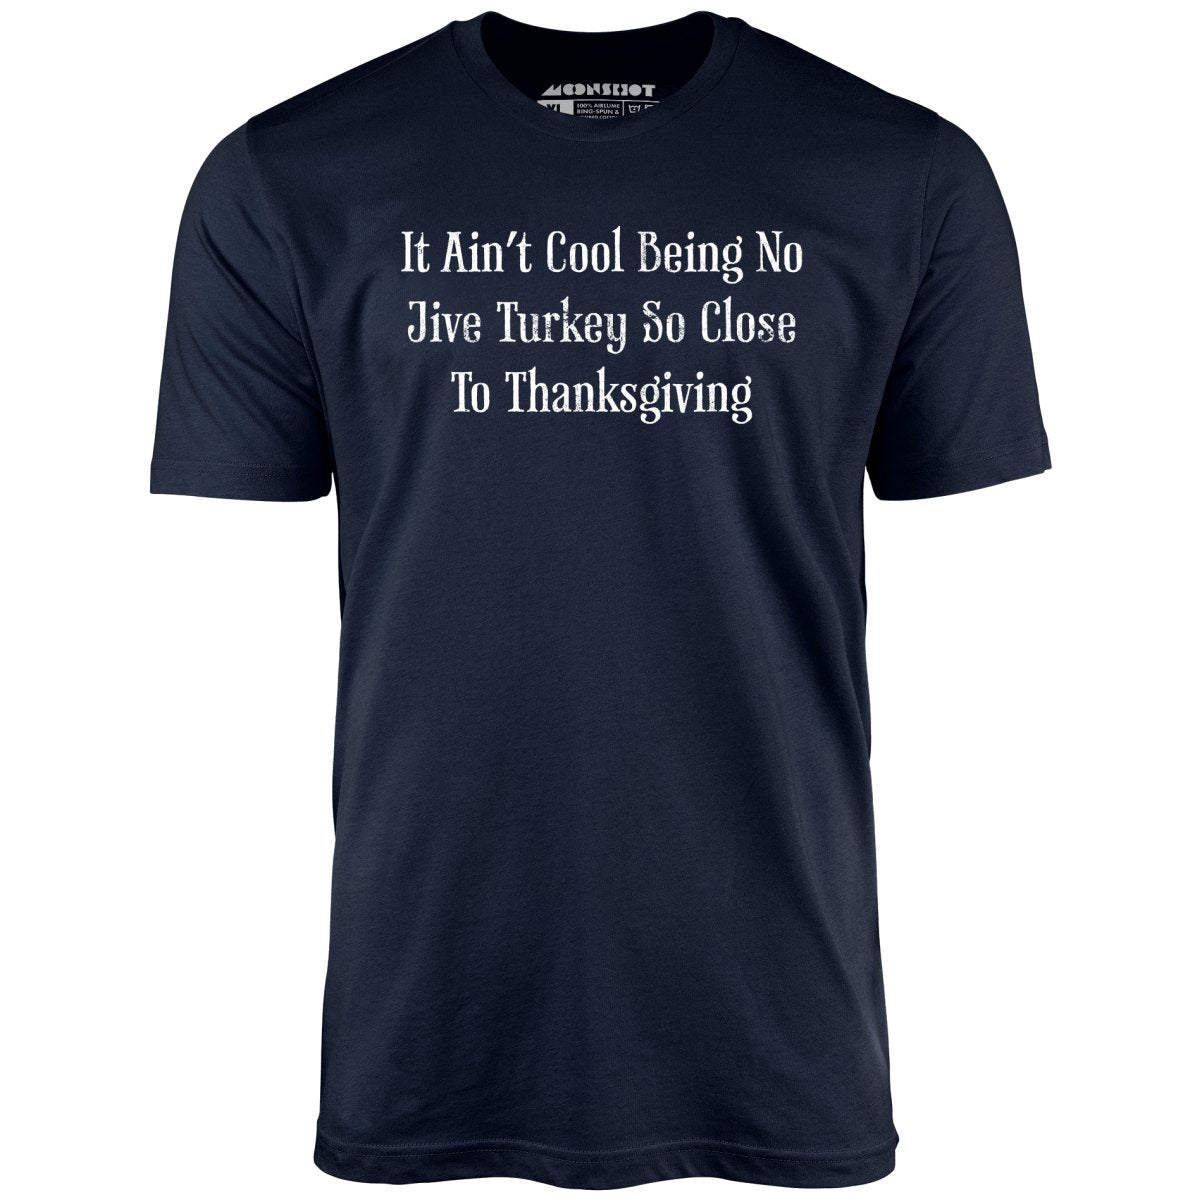 It Ain't Cool Being No Jive Turkey So Close to Thanksgiving - Unisex T-Shirt